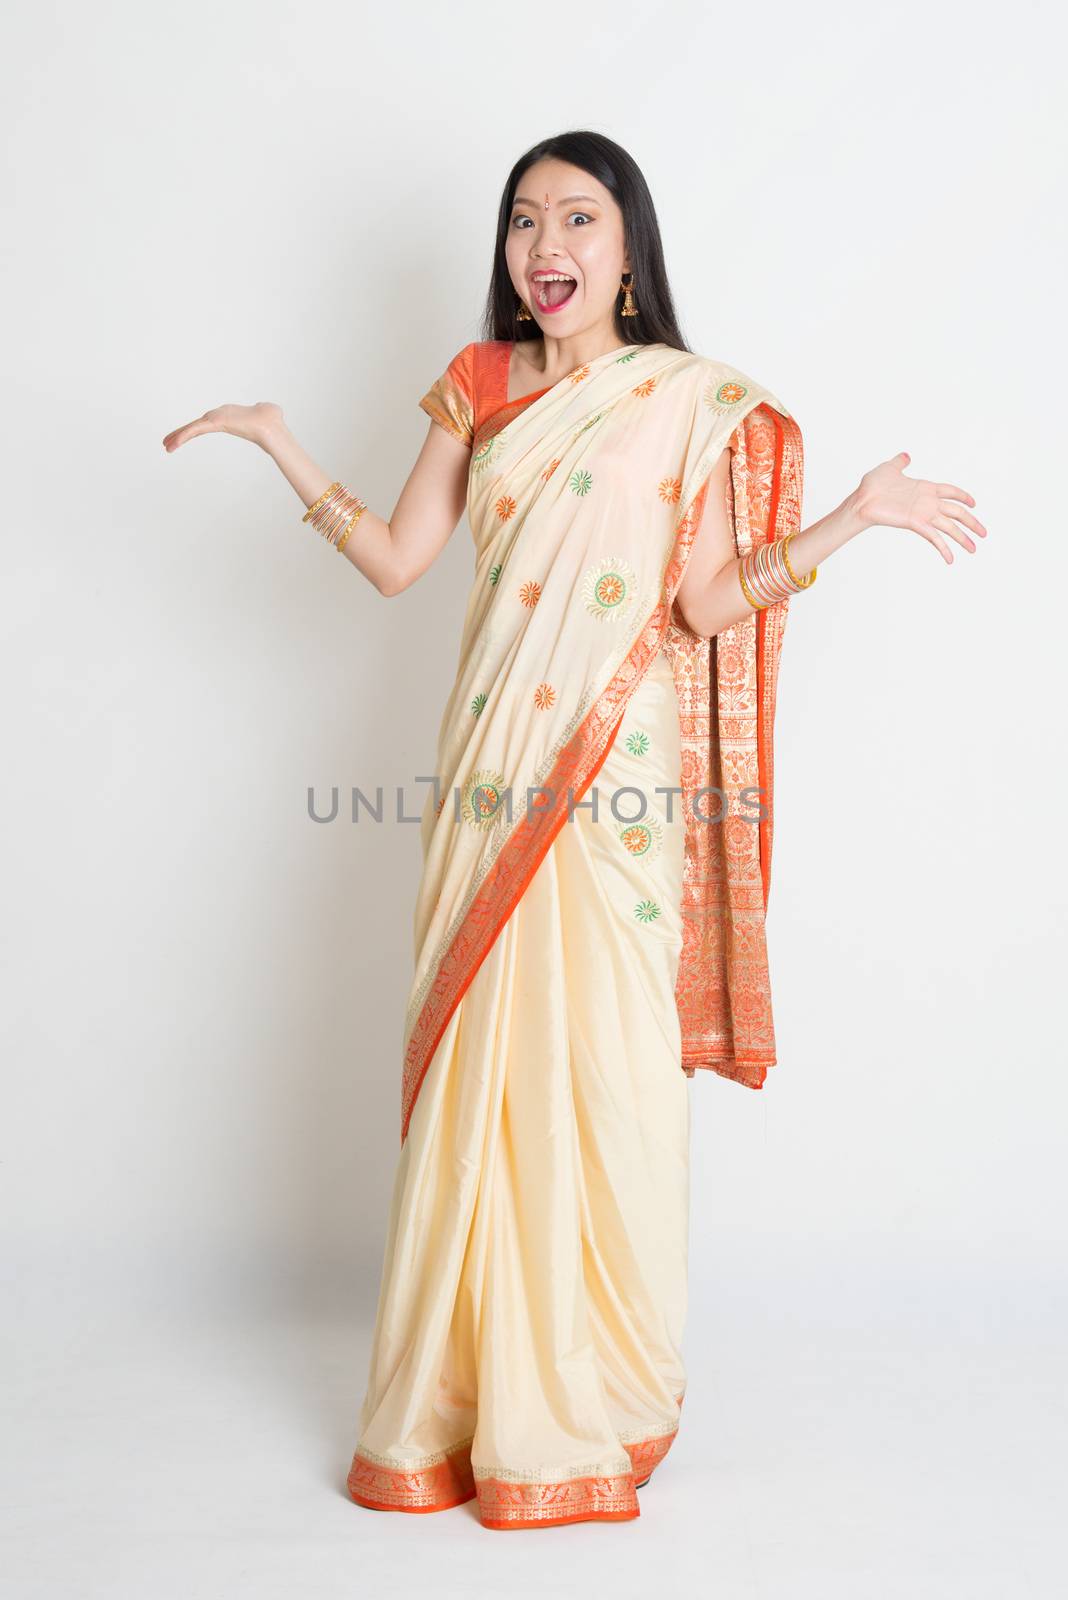 Portrait of surprised young mixed race Indian Chinese female in traditional sari dress, full length on plain background.